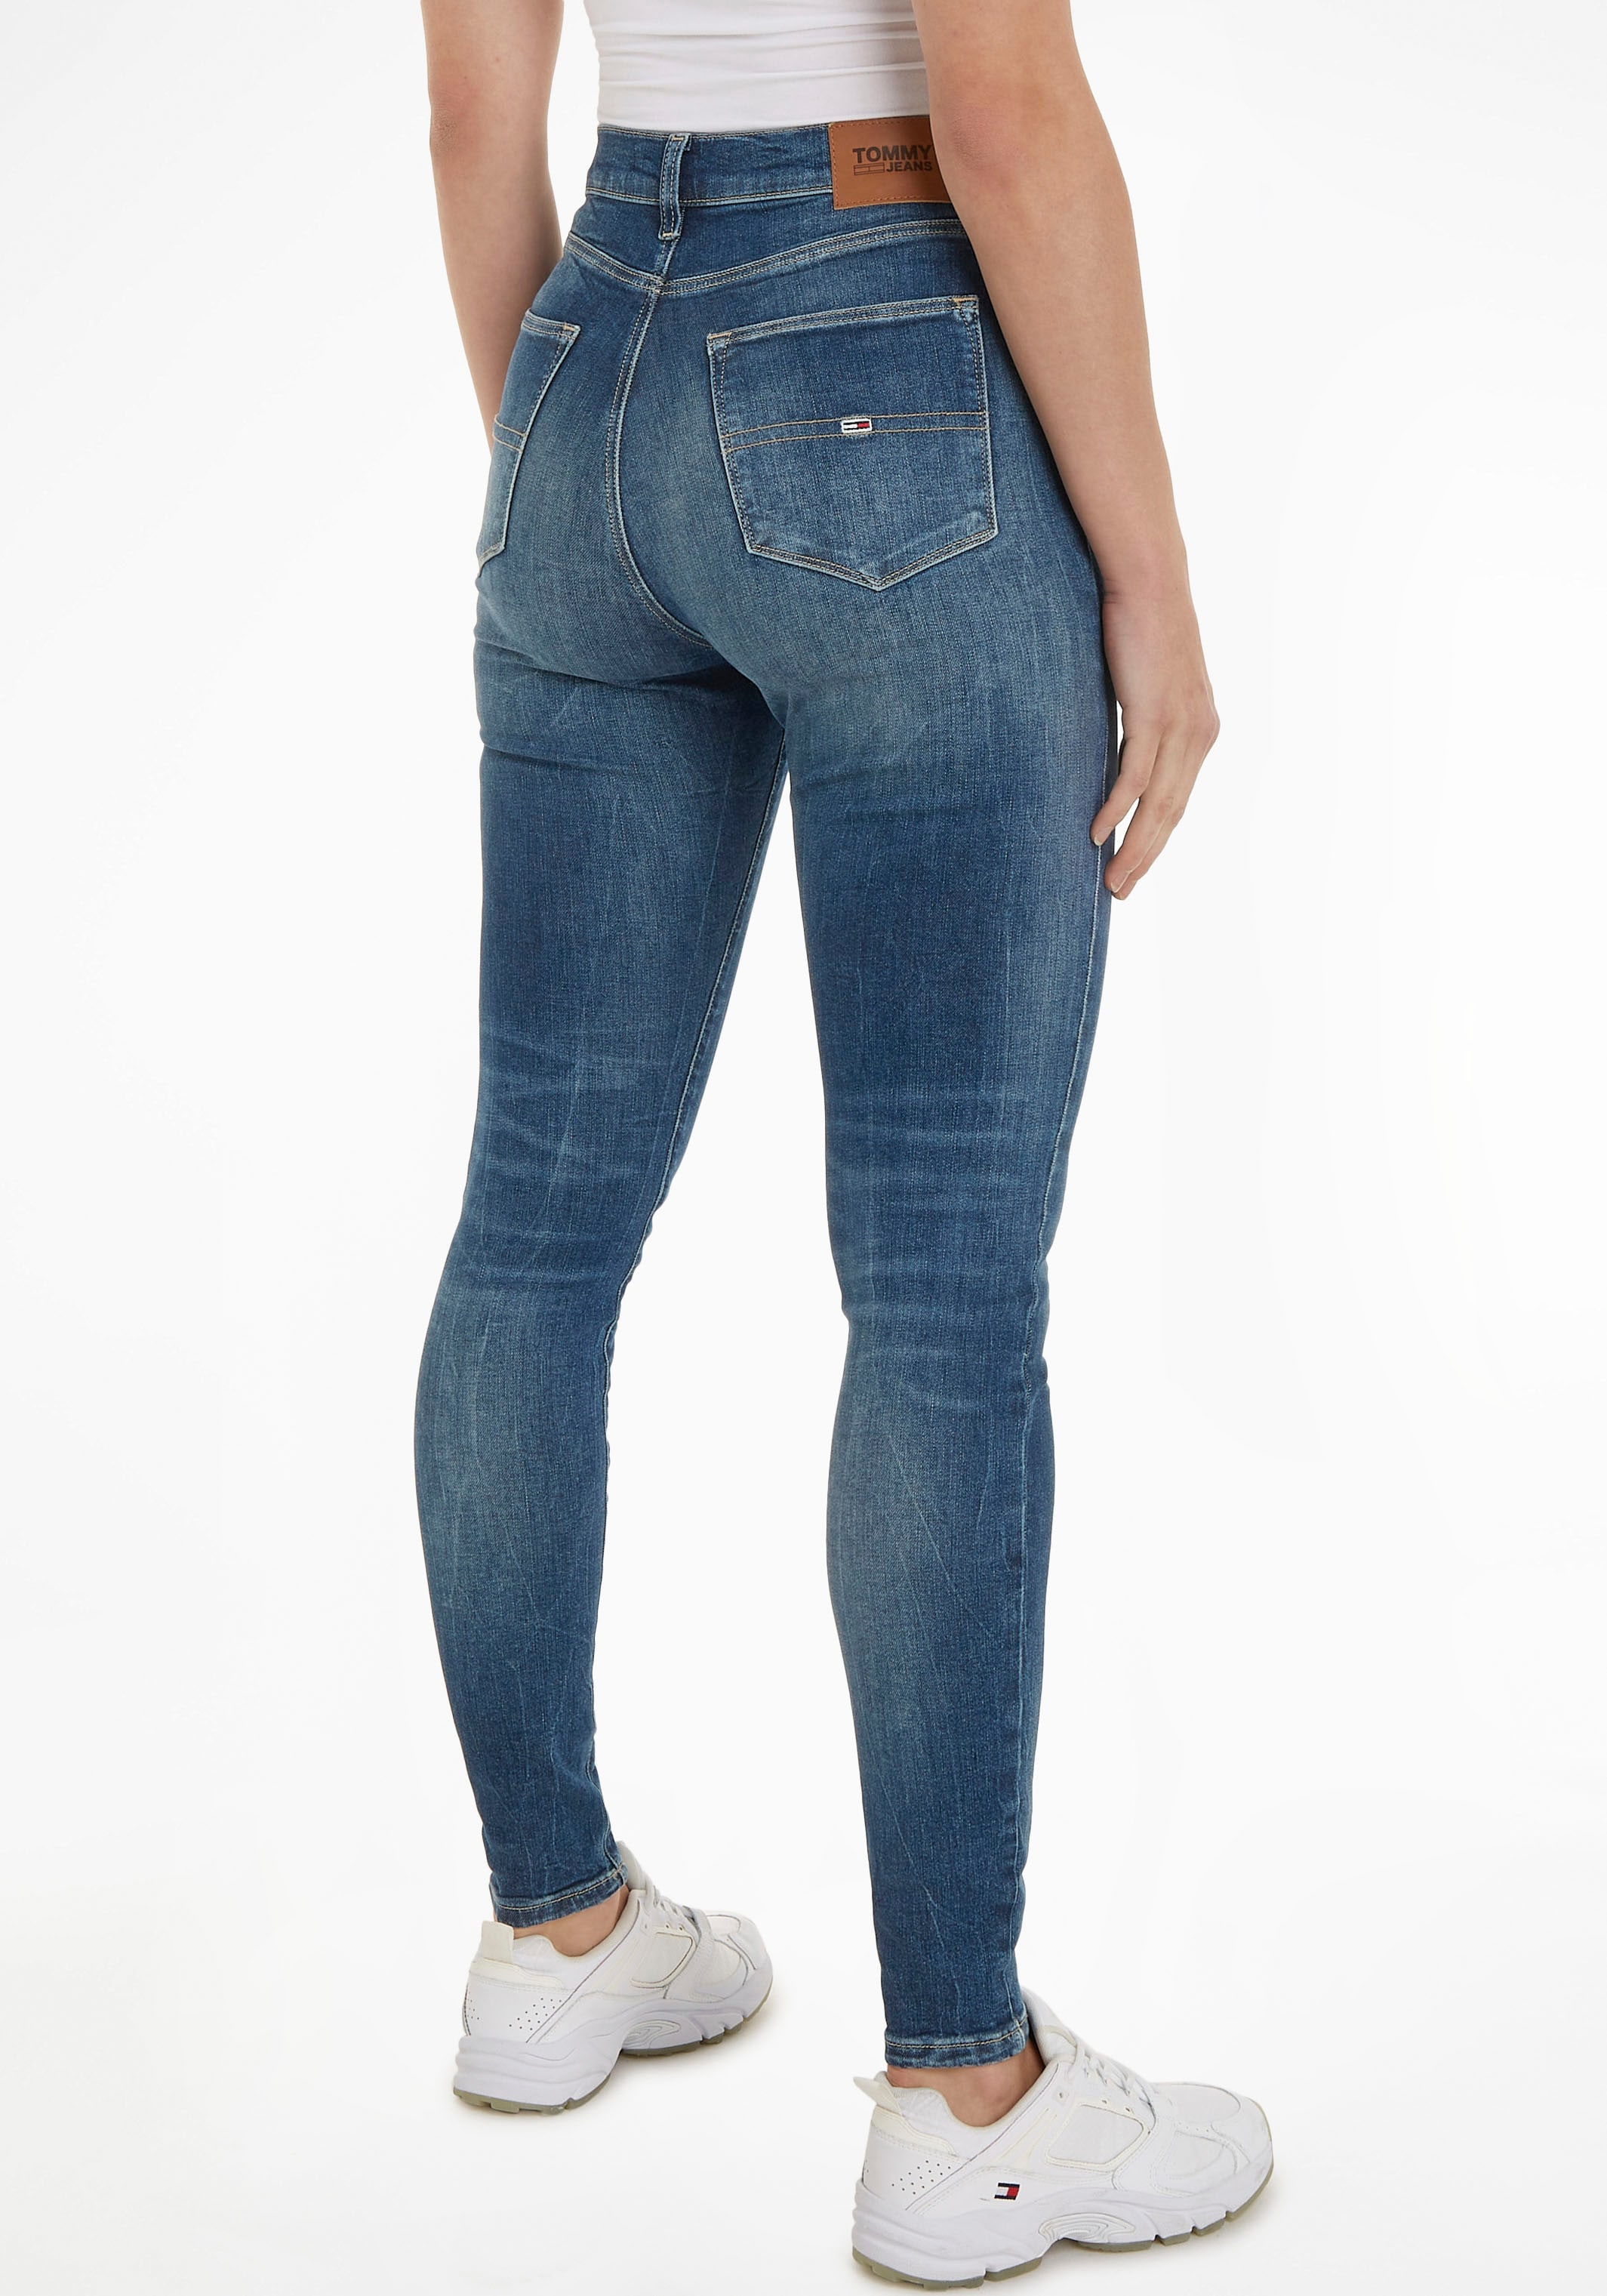 Tommy Jeans Skinny-fit-Jeans »Jeans SYLVIA SSKN HR und im mit Online Logobadge Labelflags Shop OTTO CG4«